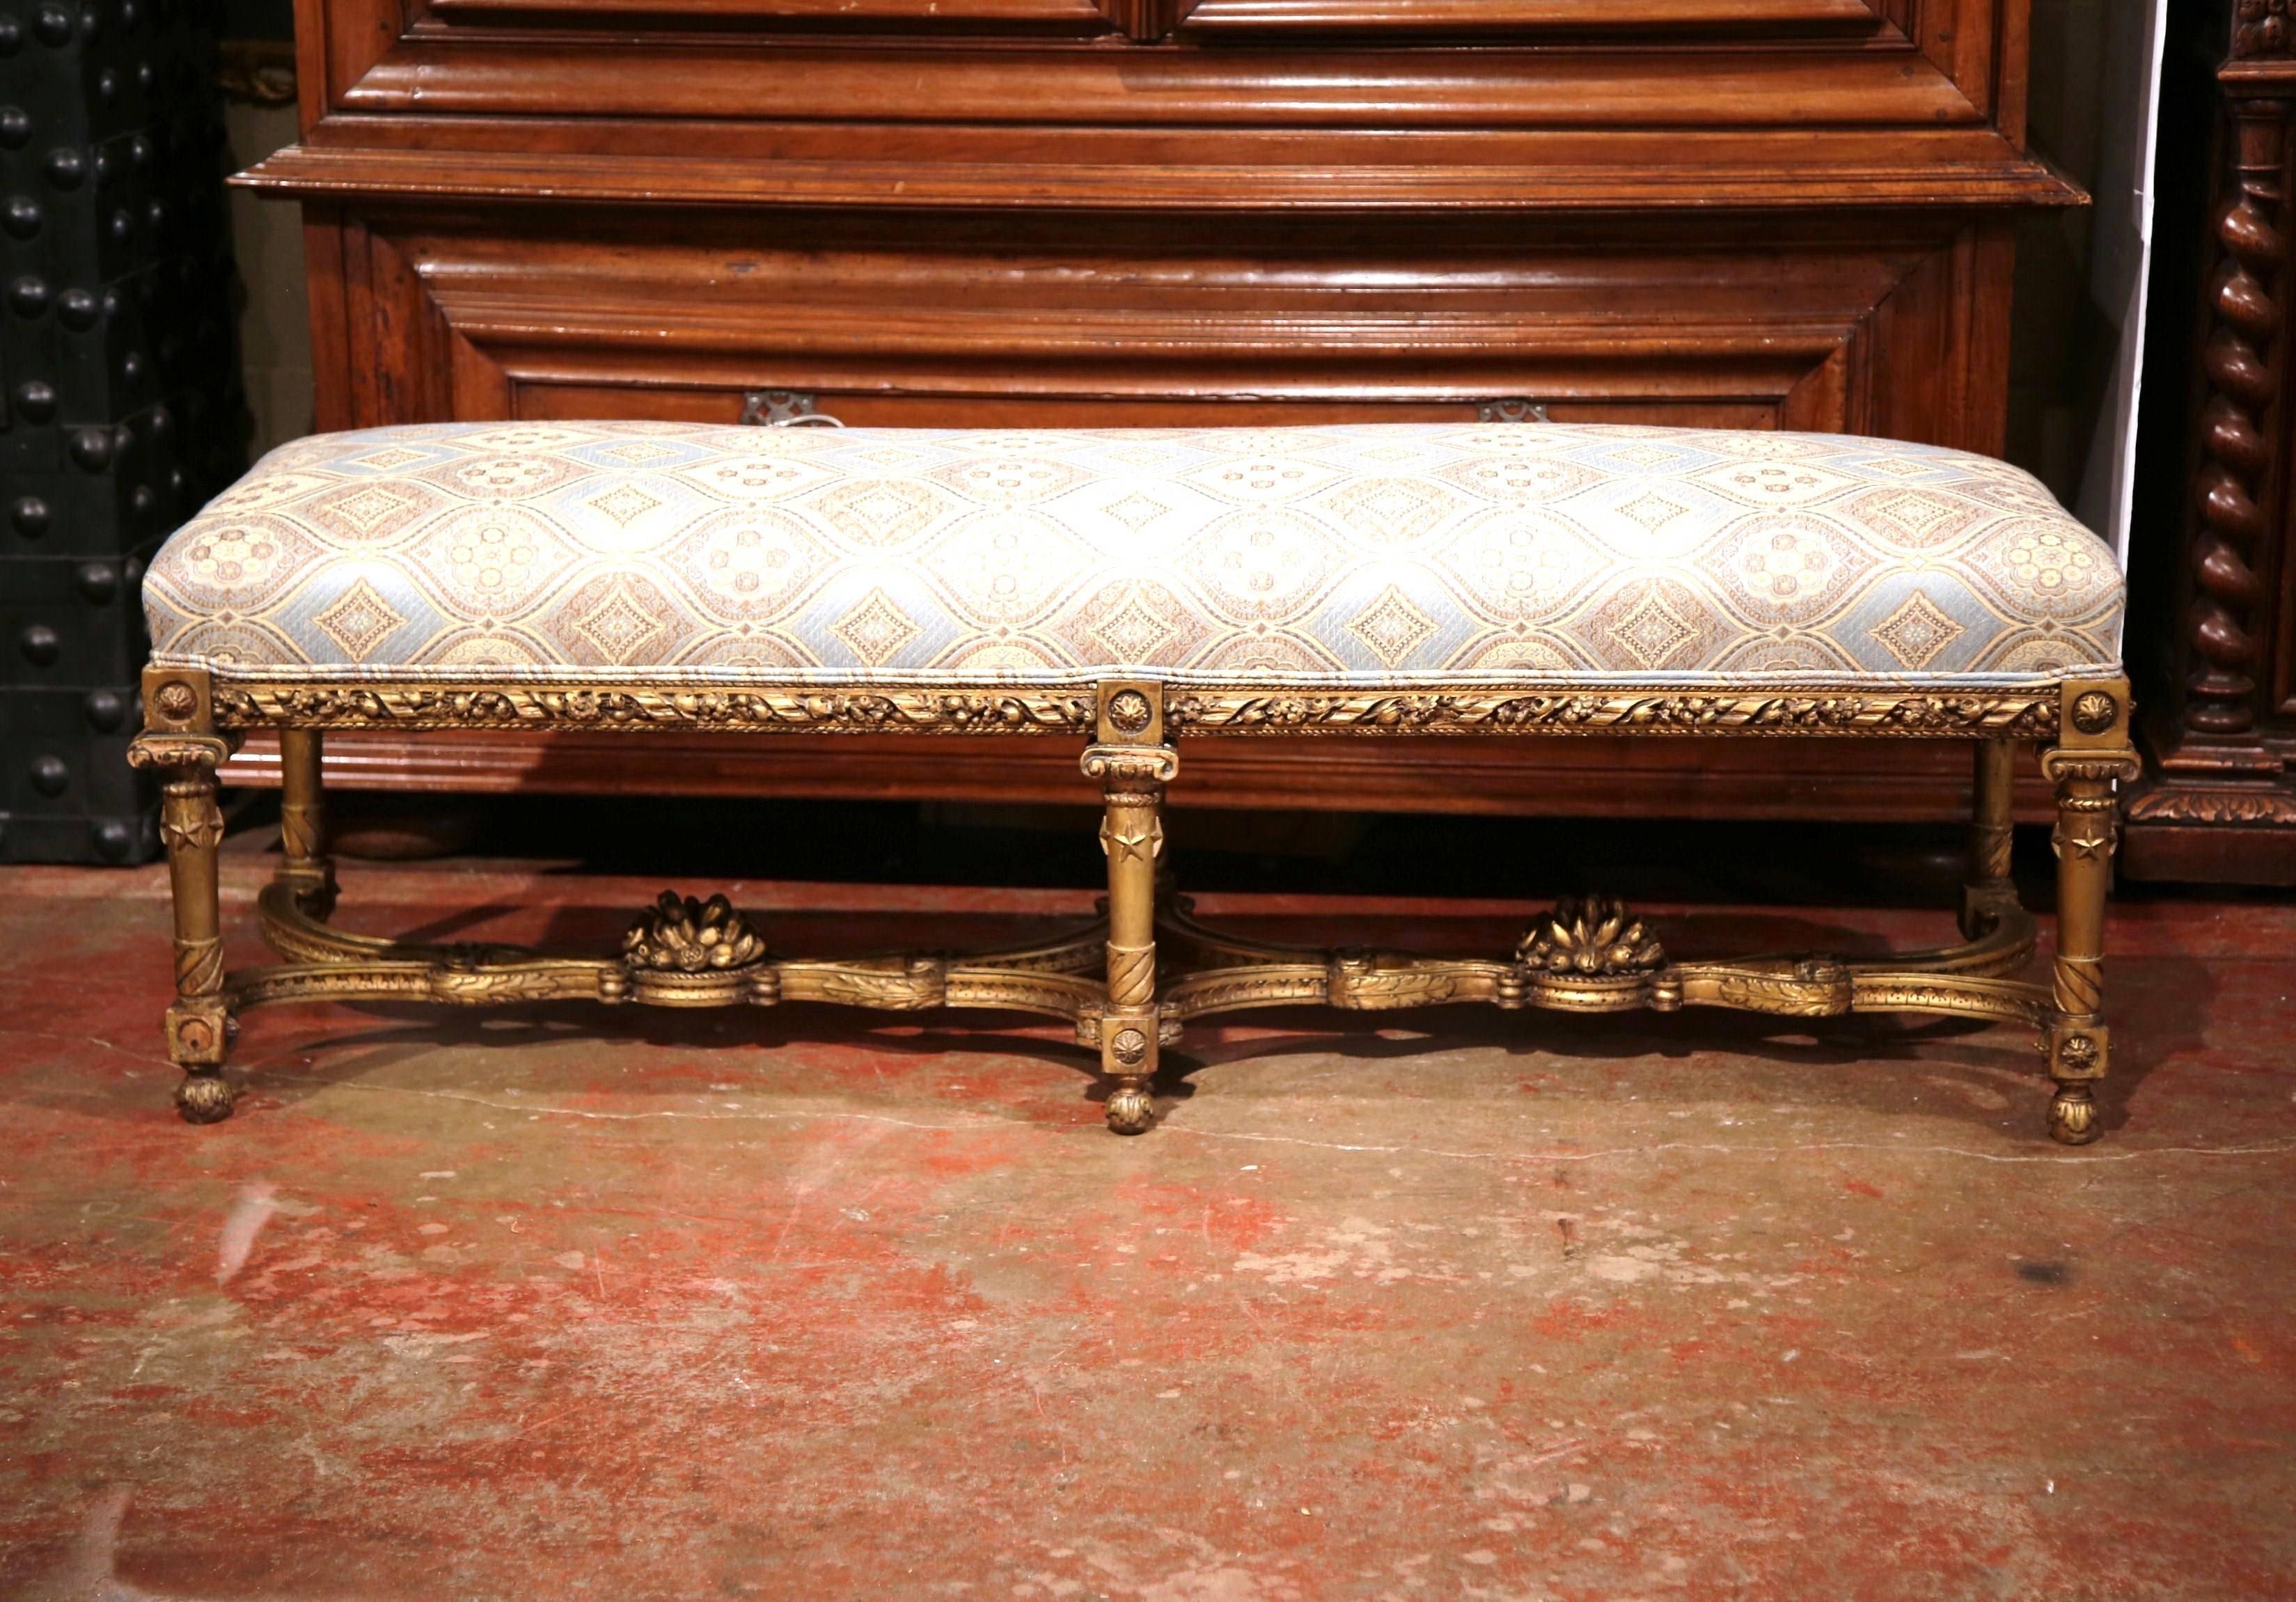 Place this elegant antique bench at the foot of your king-size bed! Crafted in France, circa 1810, the bench with six legs features a carved apron around the frame and a very ornate stretcher with a center flower vase. The bench springs has been